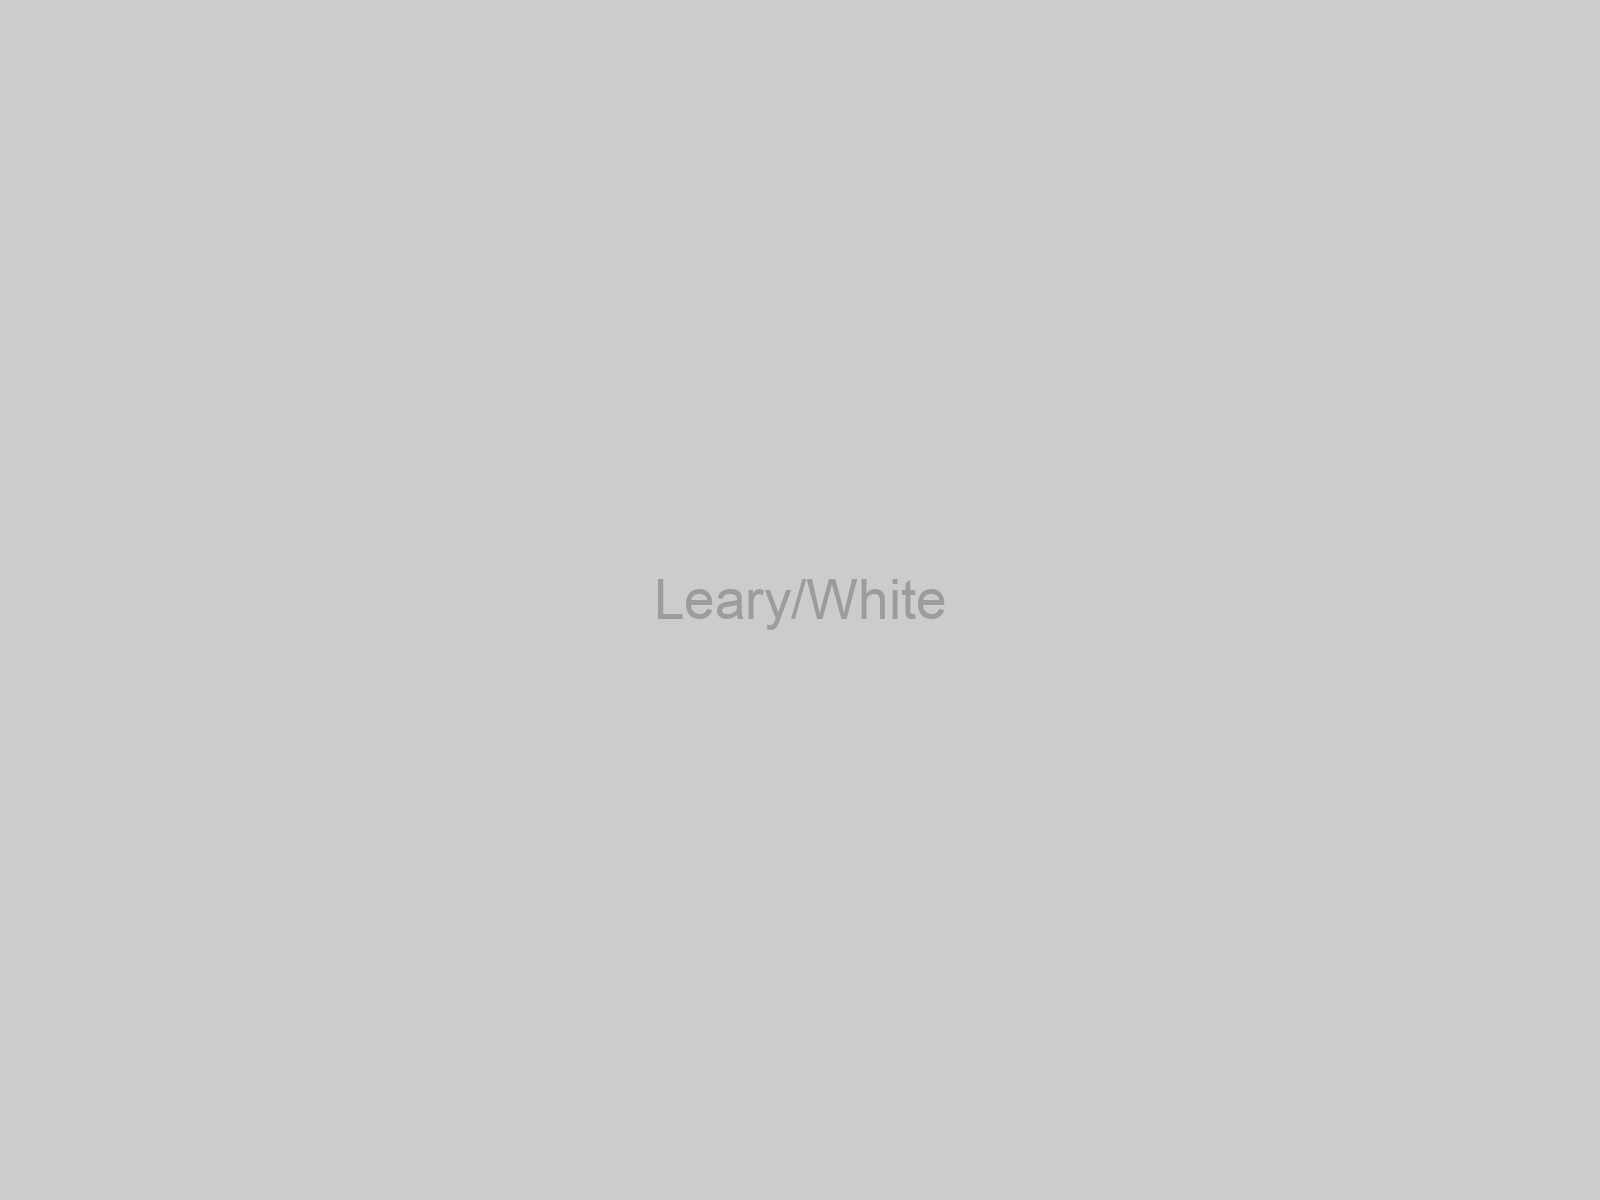 Leary/White